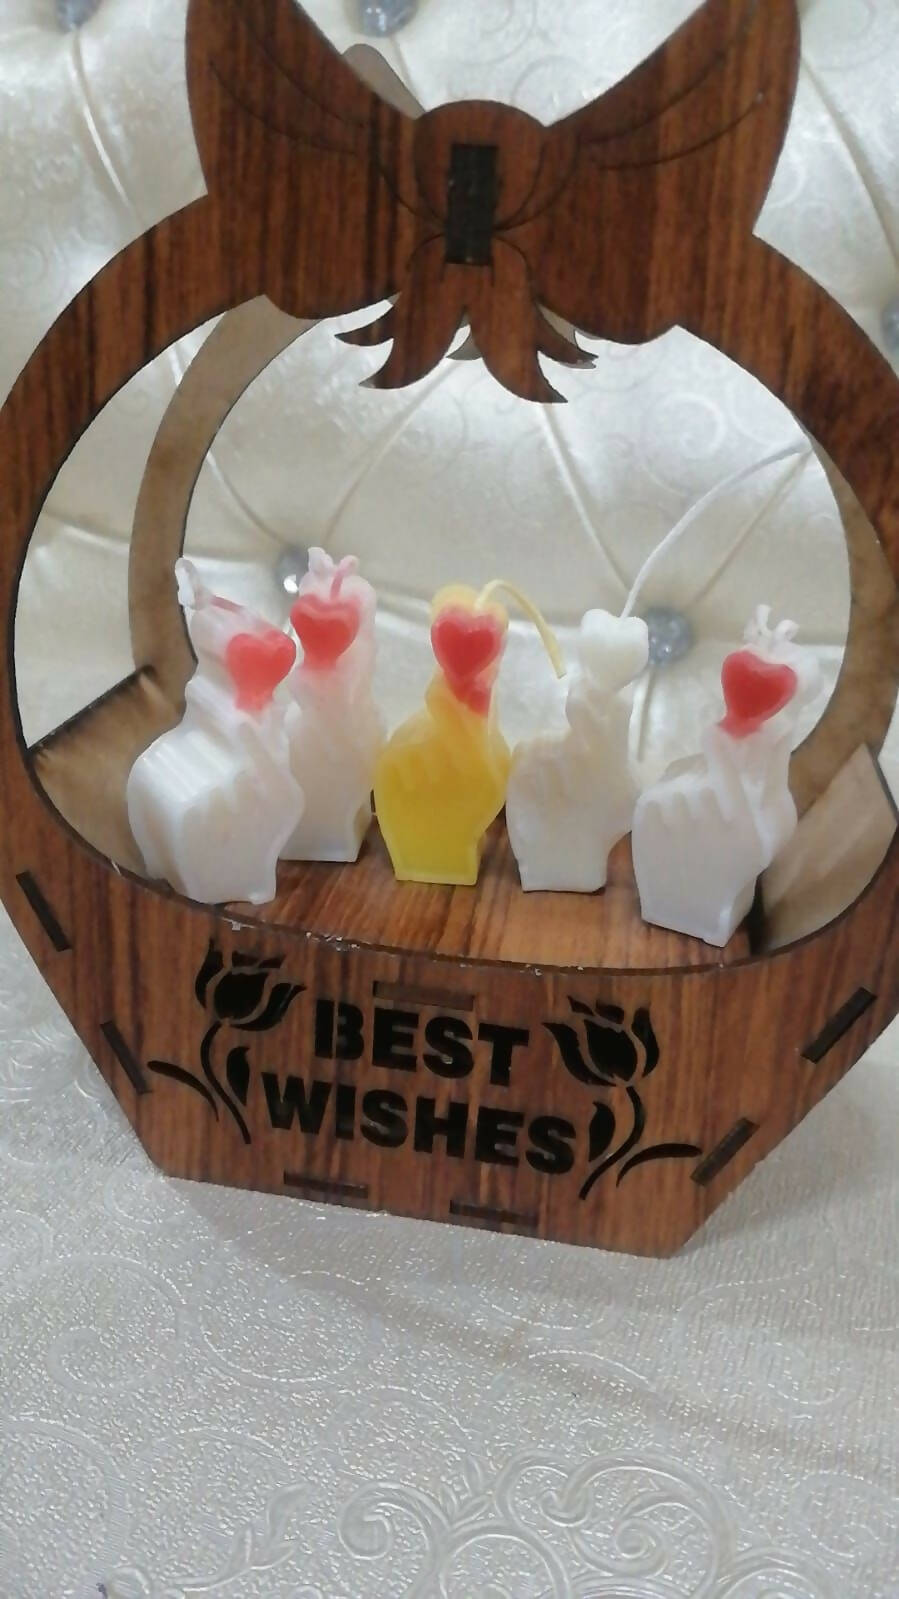 Pack of 6 Love Hand Gesture Beautiful Scented Candles